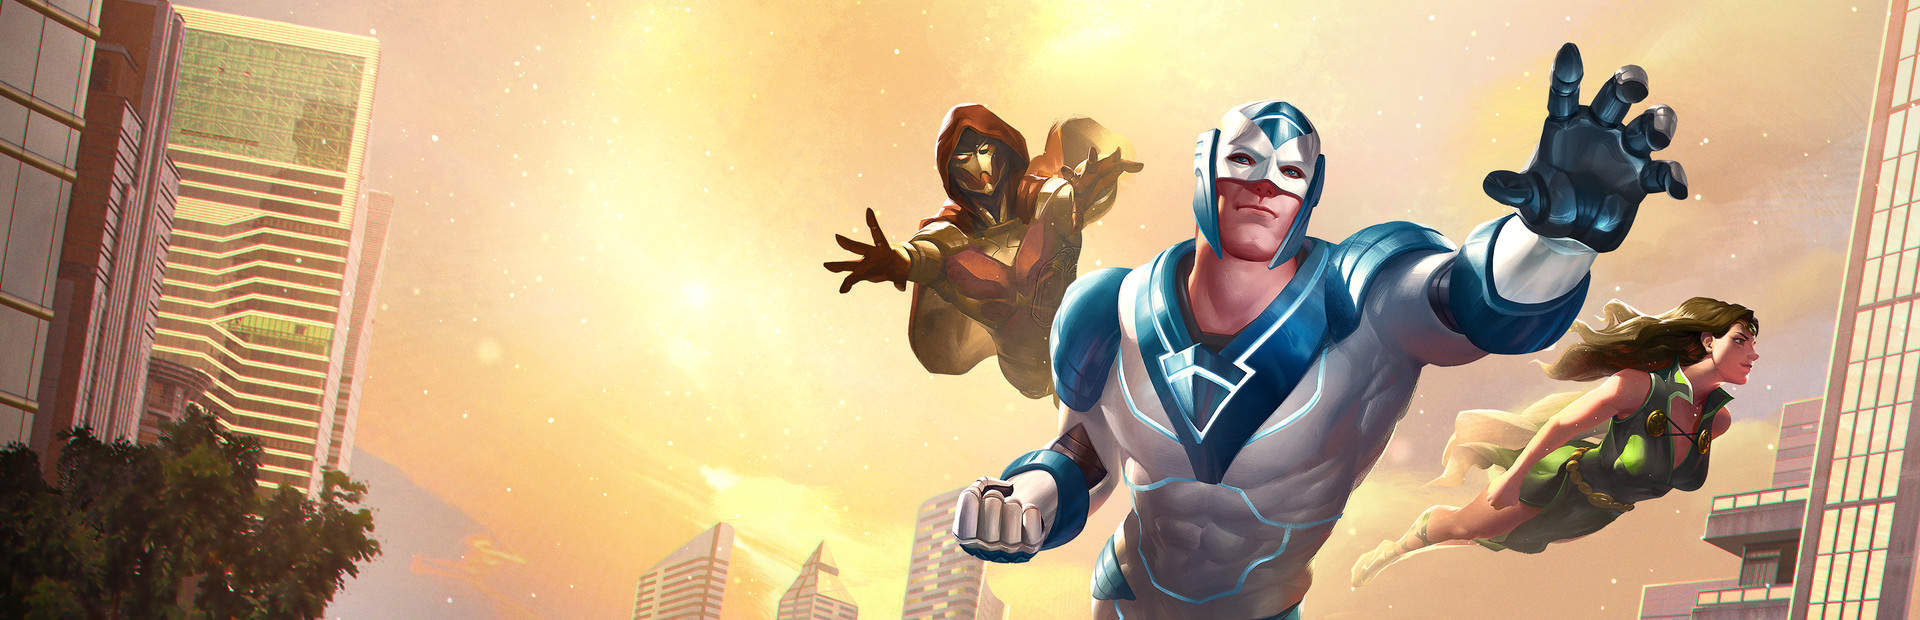 Champions Online cover image